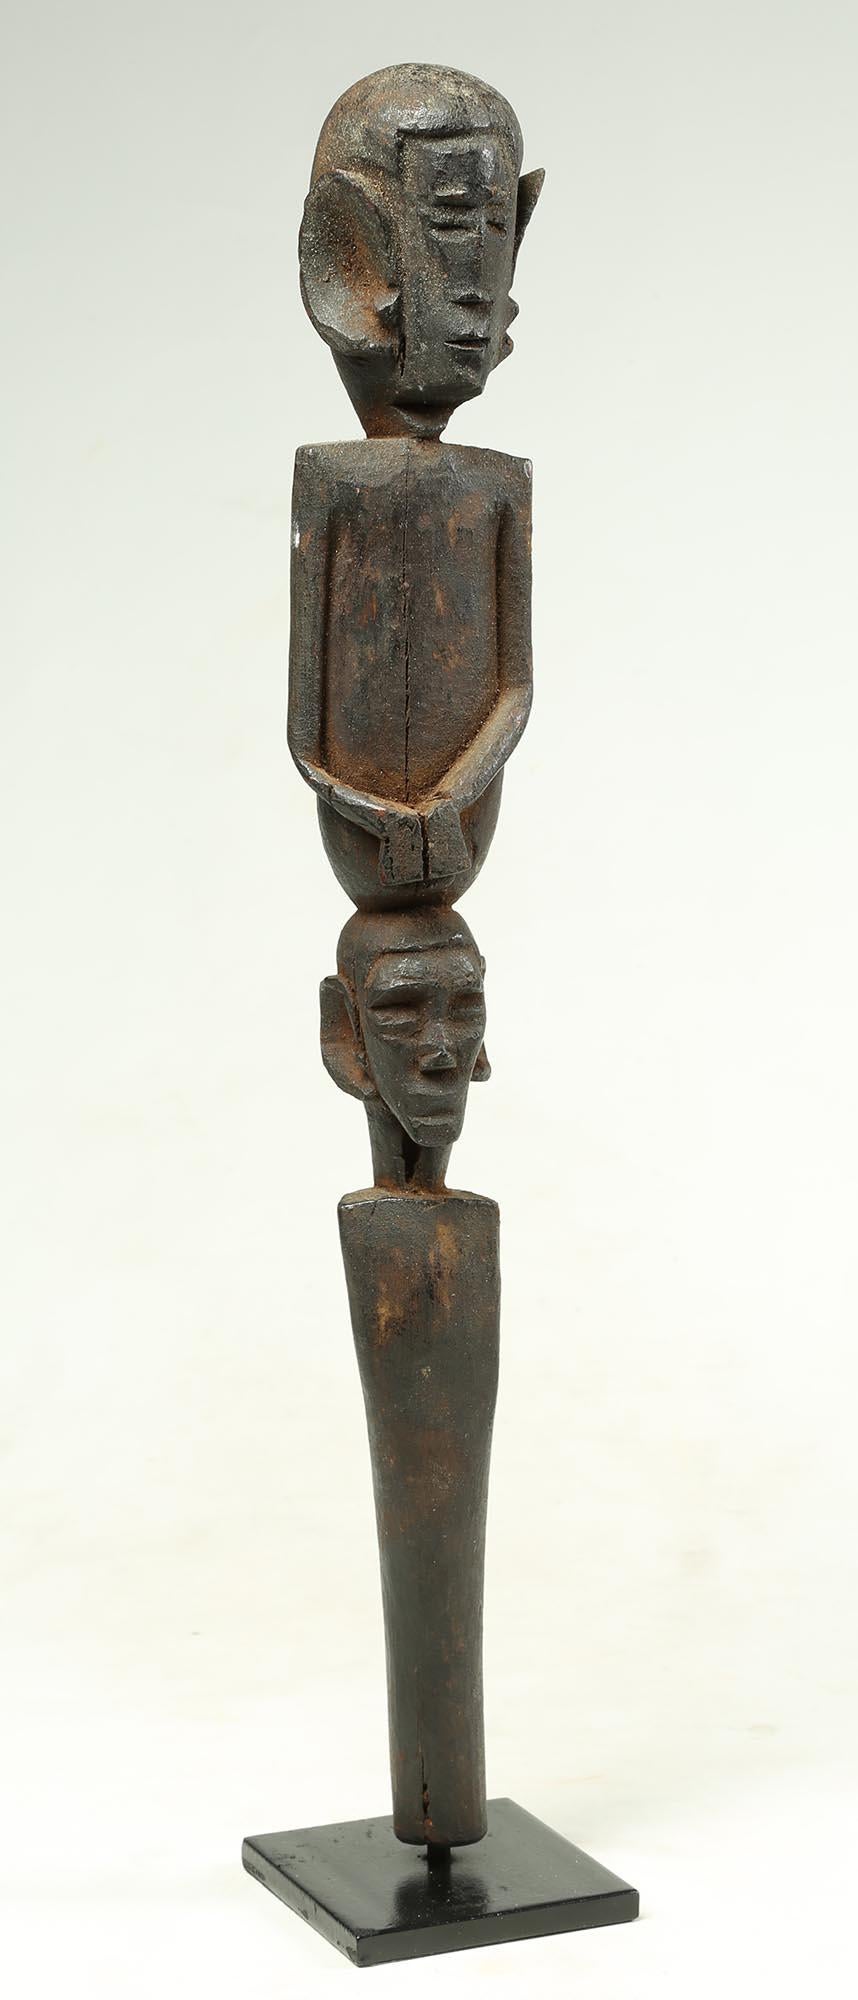 Hand-Carved East African Double Zigua Figure with Large Ears, Early 20th Century, Tanzania